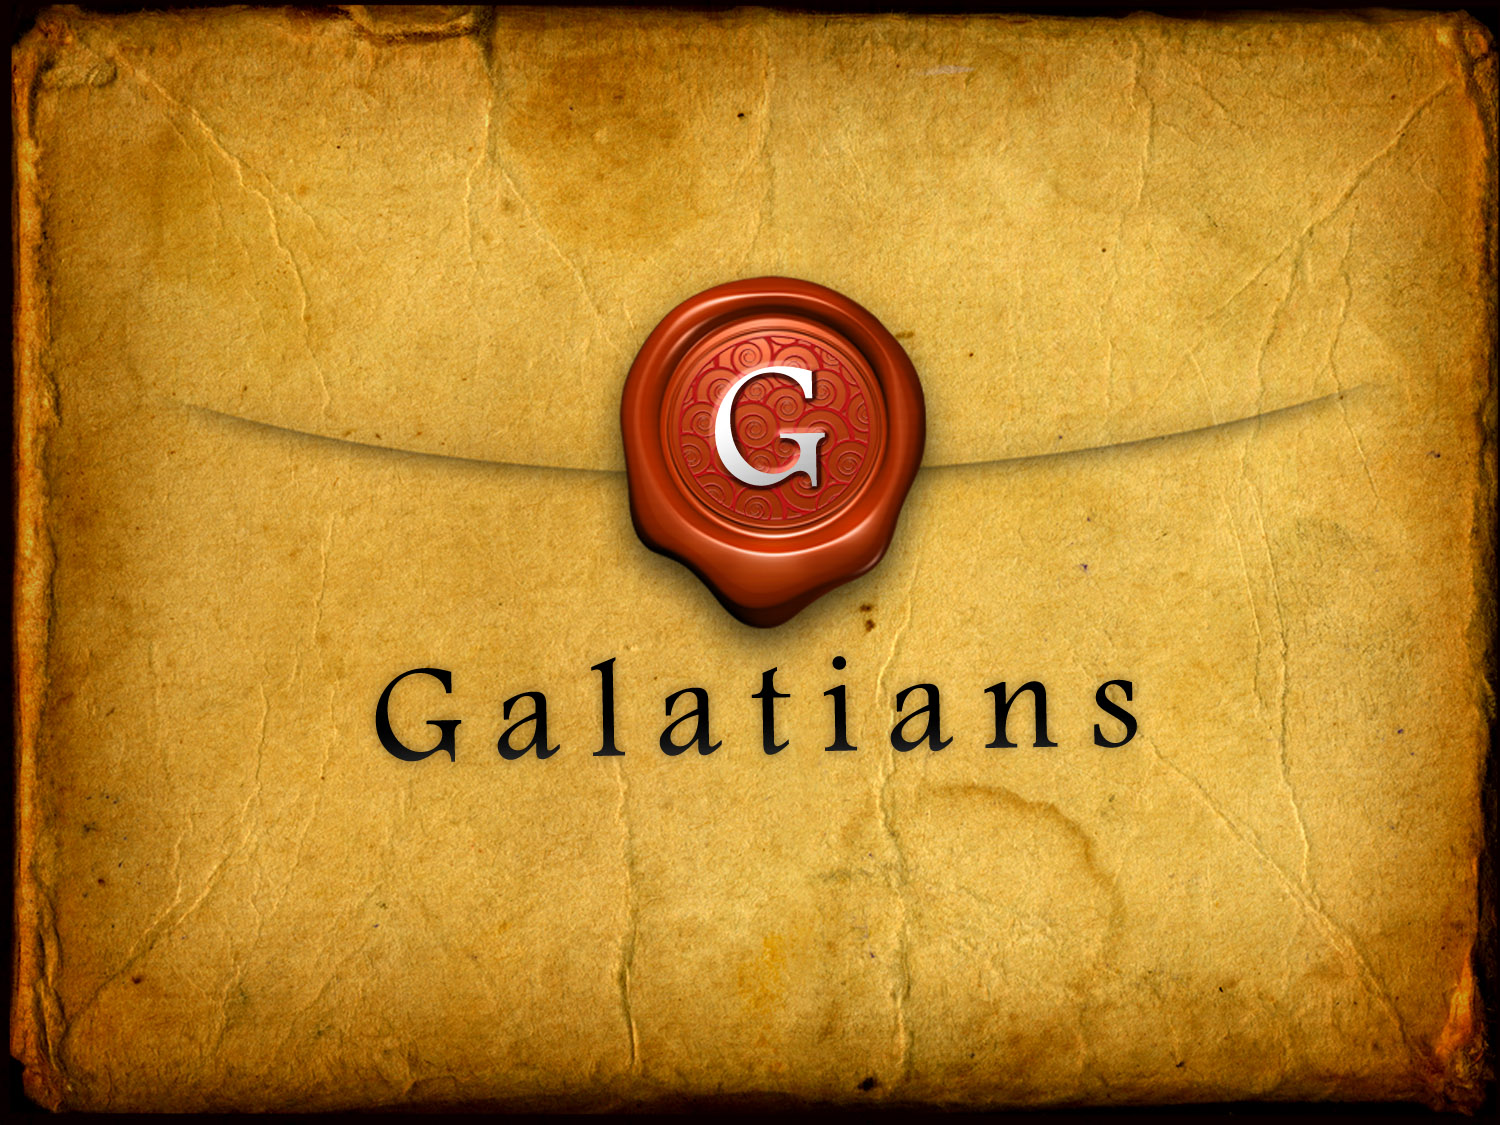 The Book of Galatians 1:10-12